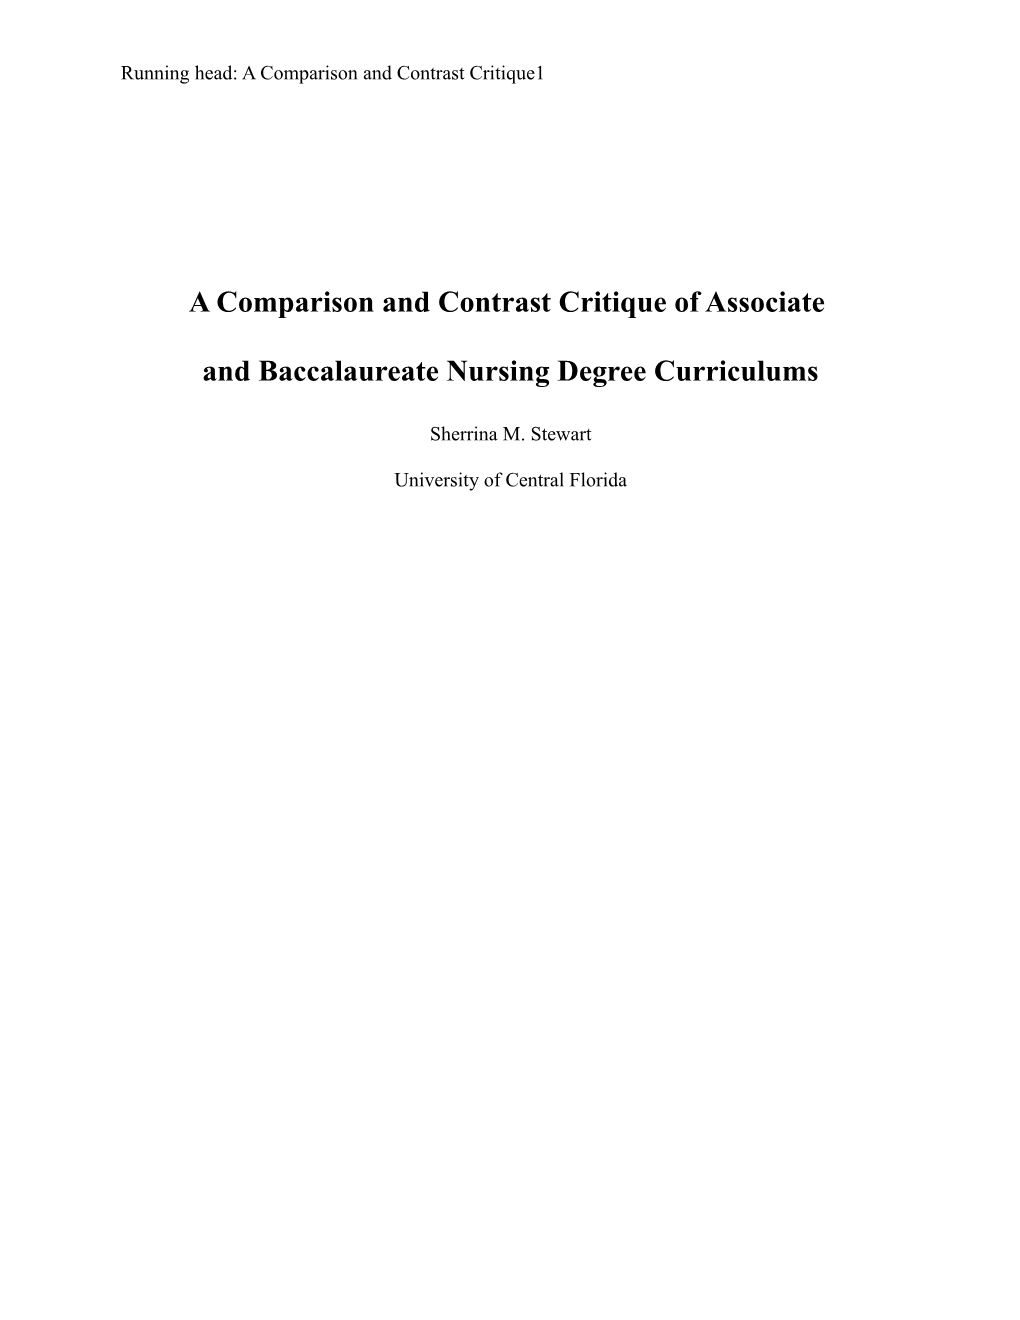 A Comparison and Contrast Critique of Associate and Baccalaureate Nursing Degree Curriculums